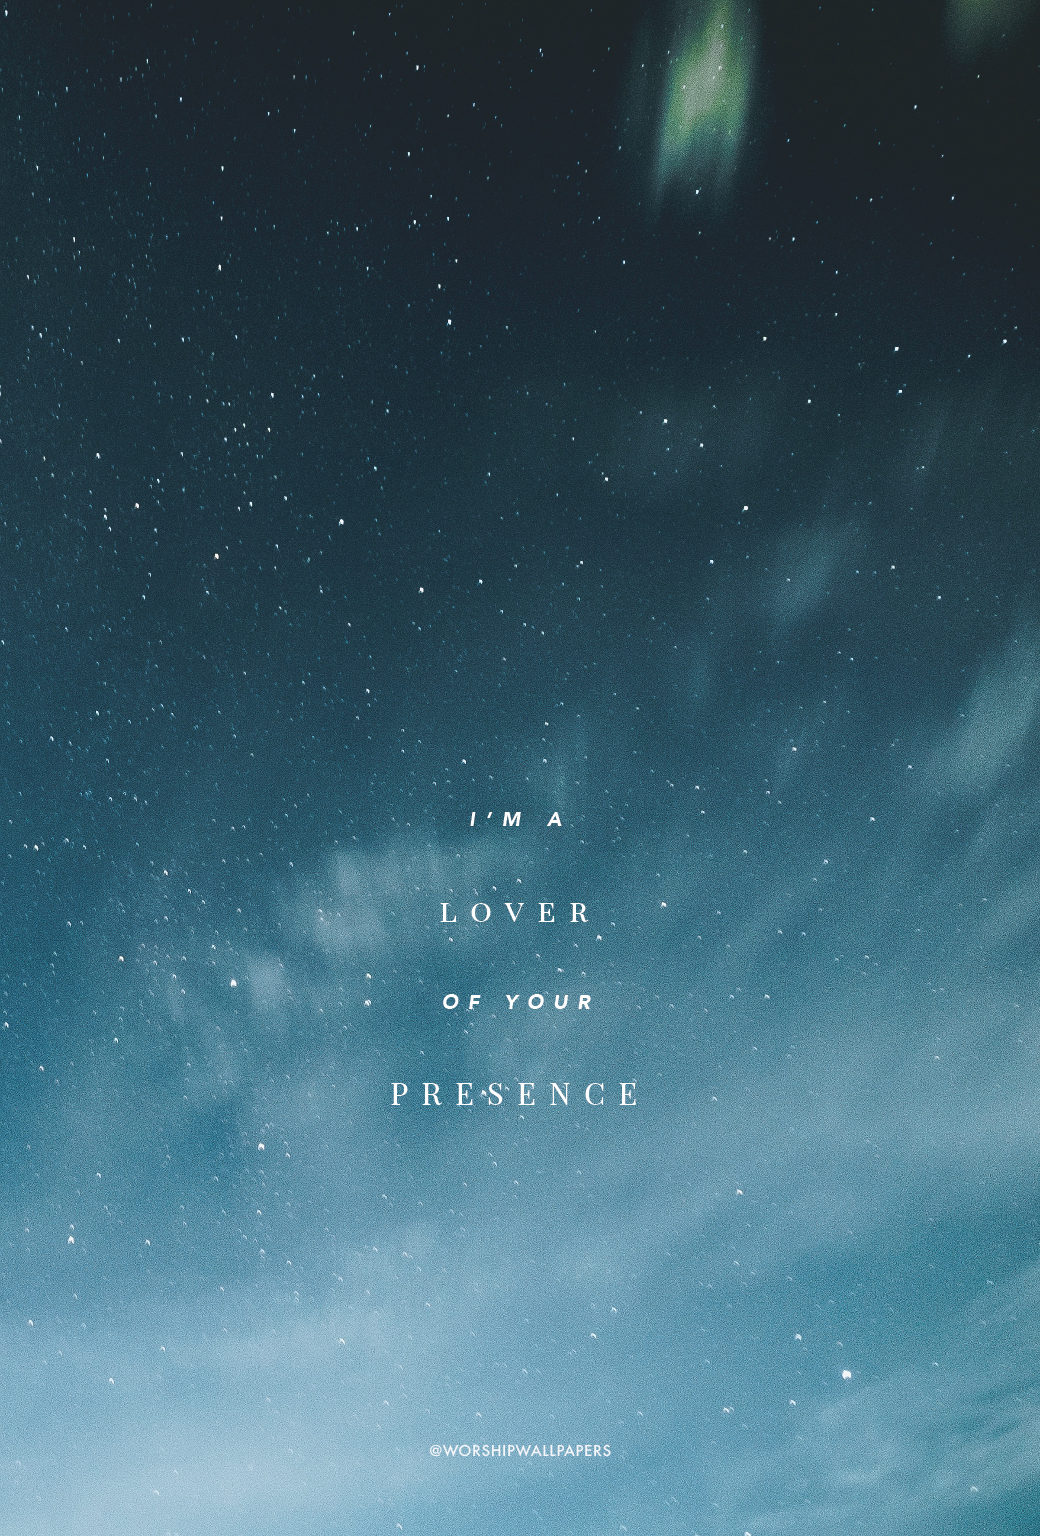 Elevation Worship Wallpapers